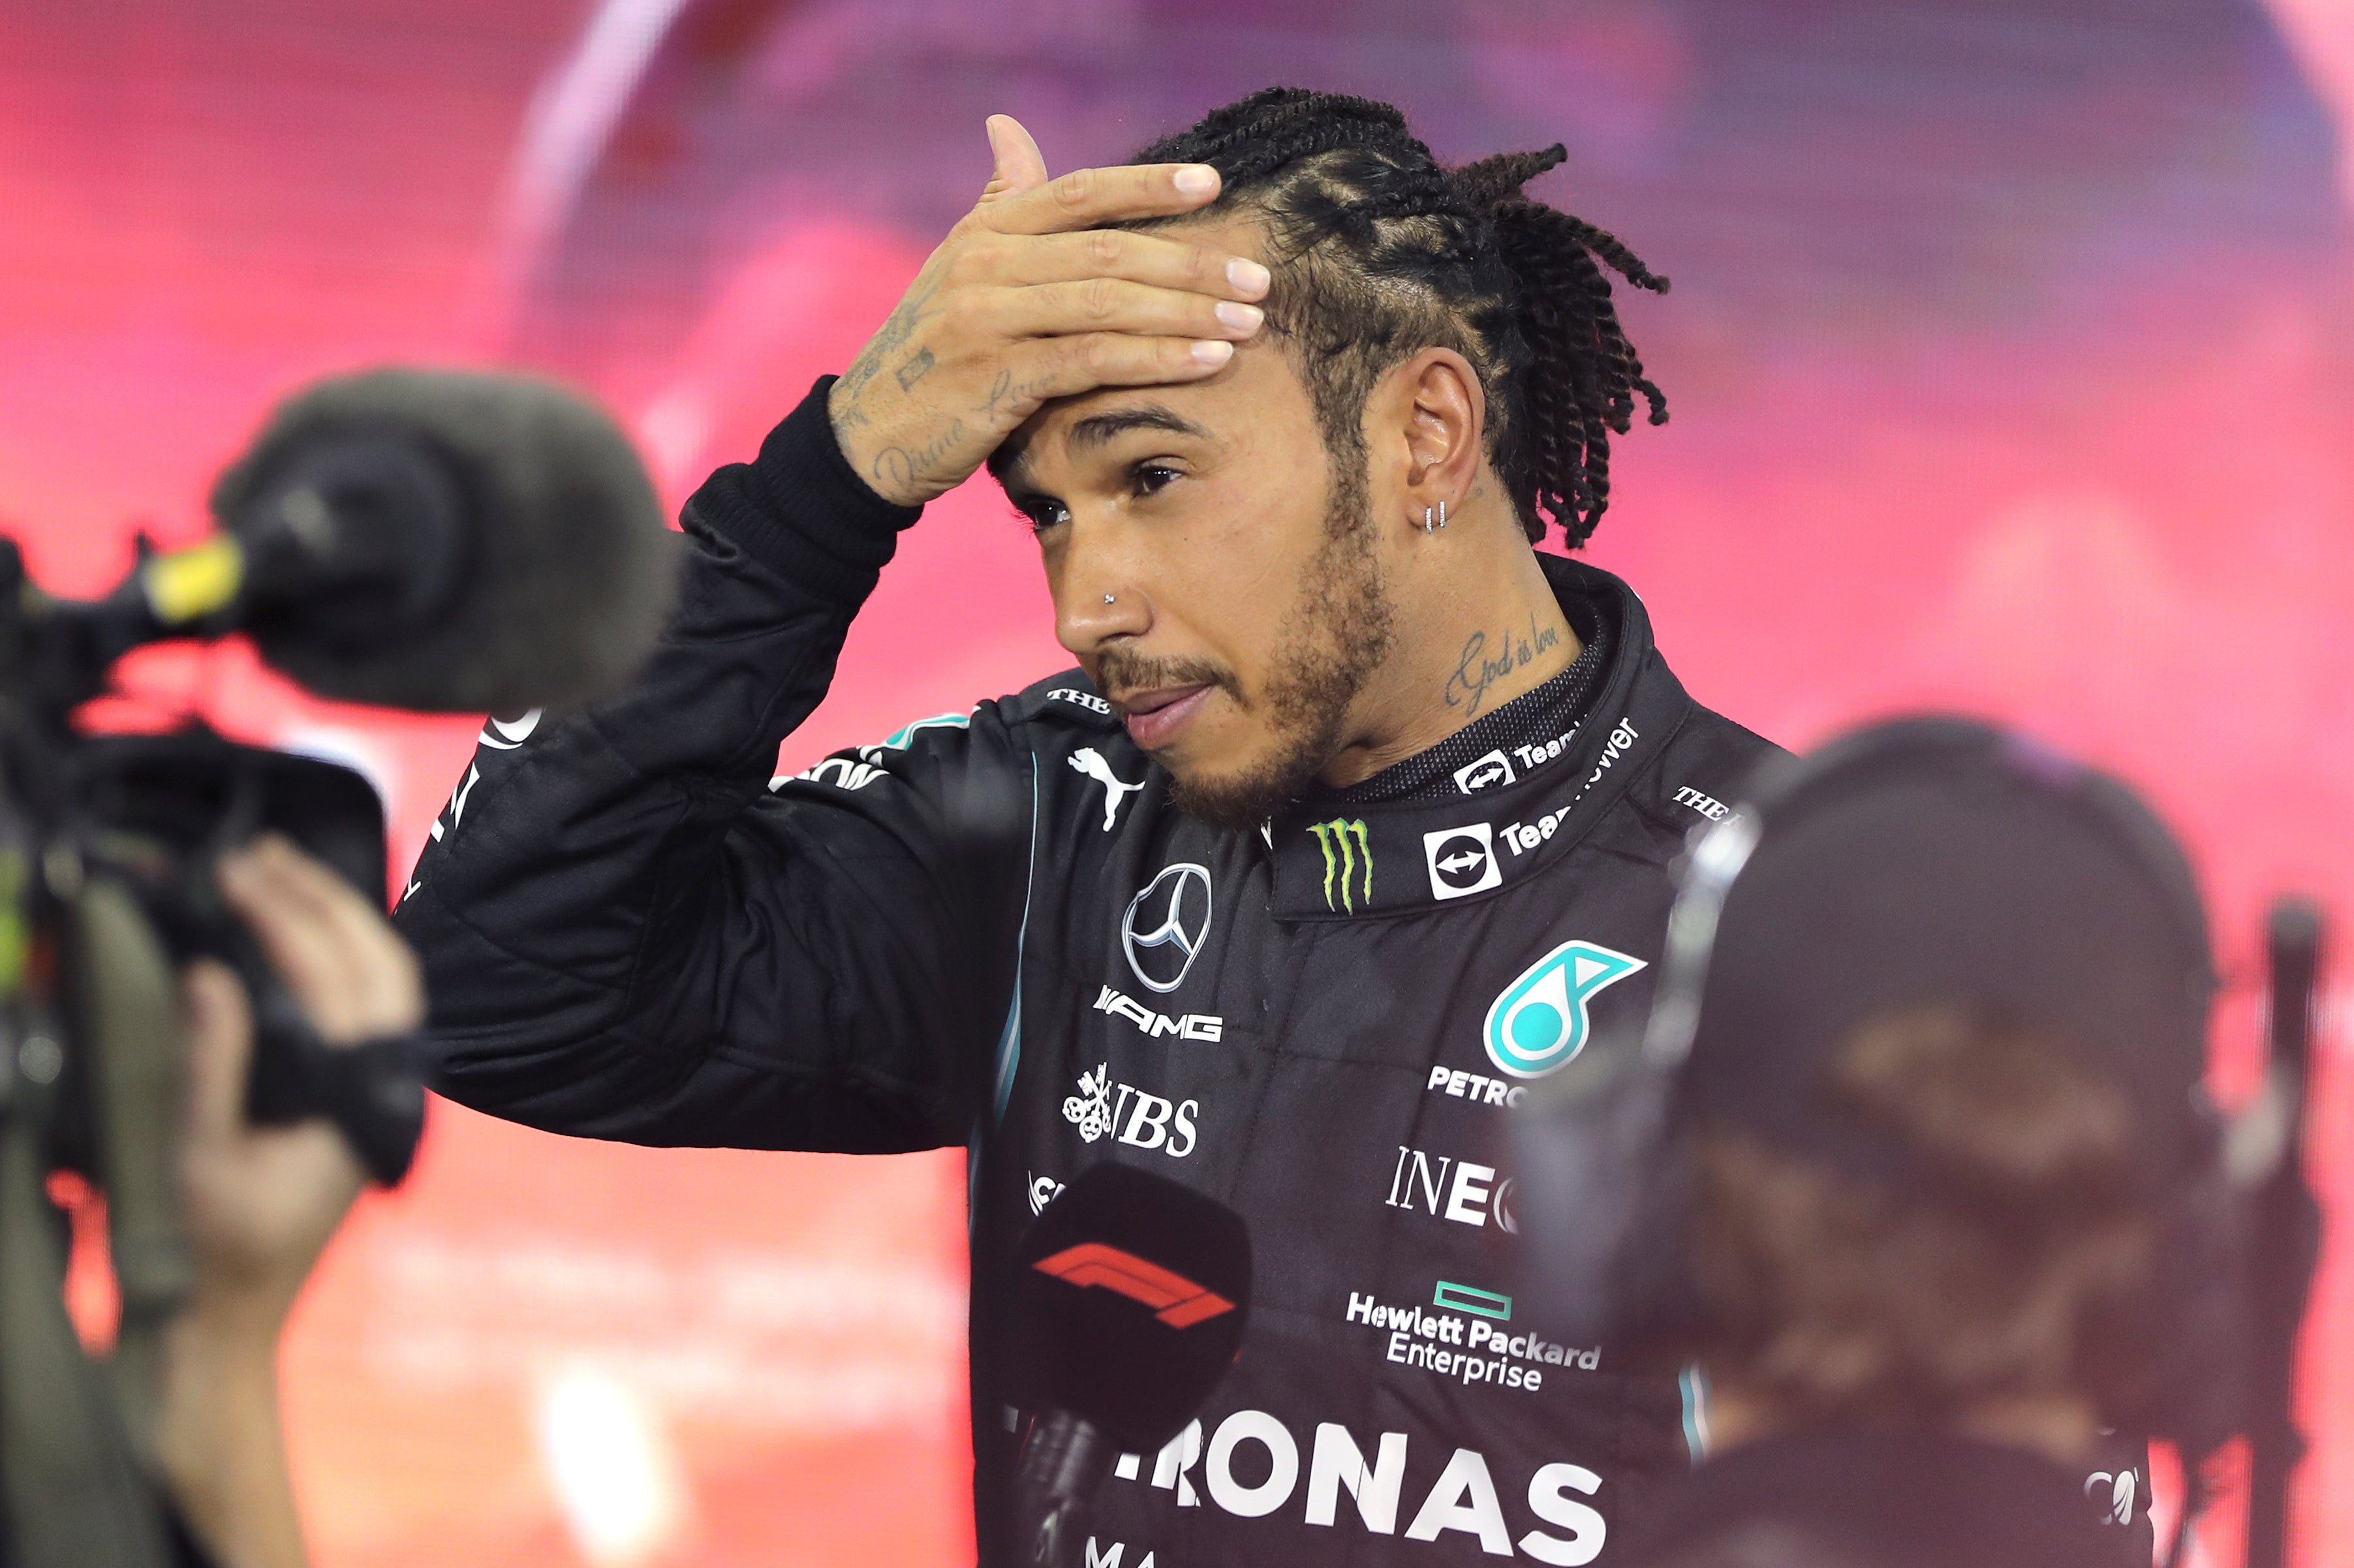 Lewis Hamilton was denied a record eighth world title by Max Verstappen